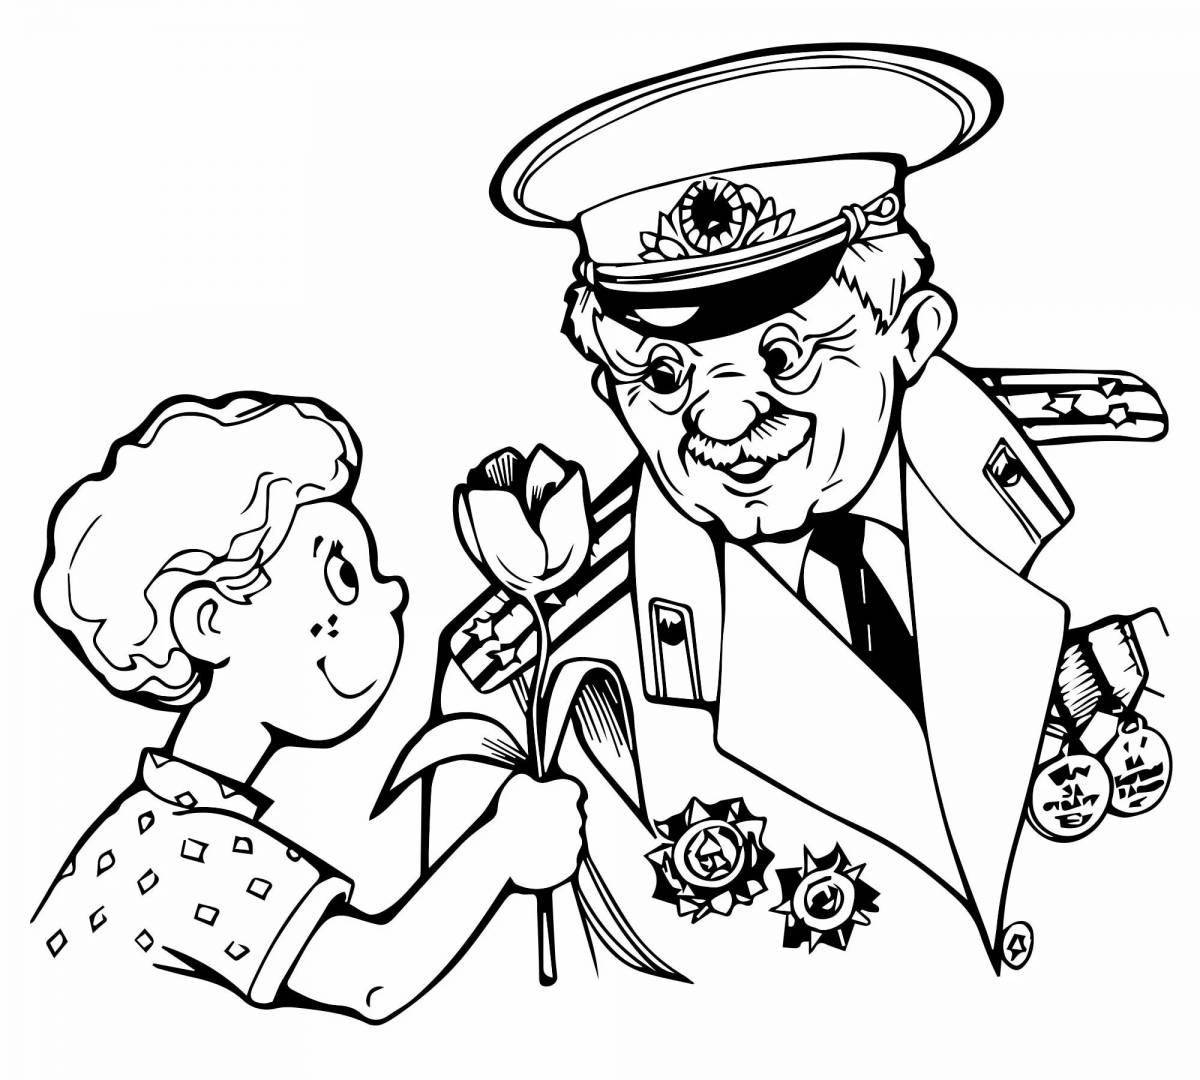 Amazing war hero coloring pages for kids